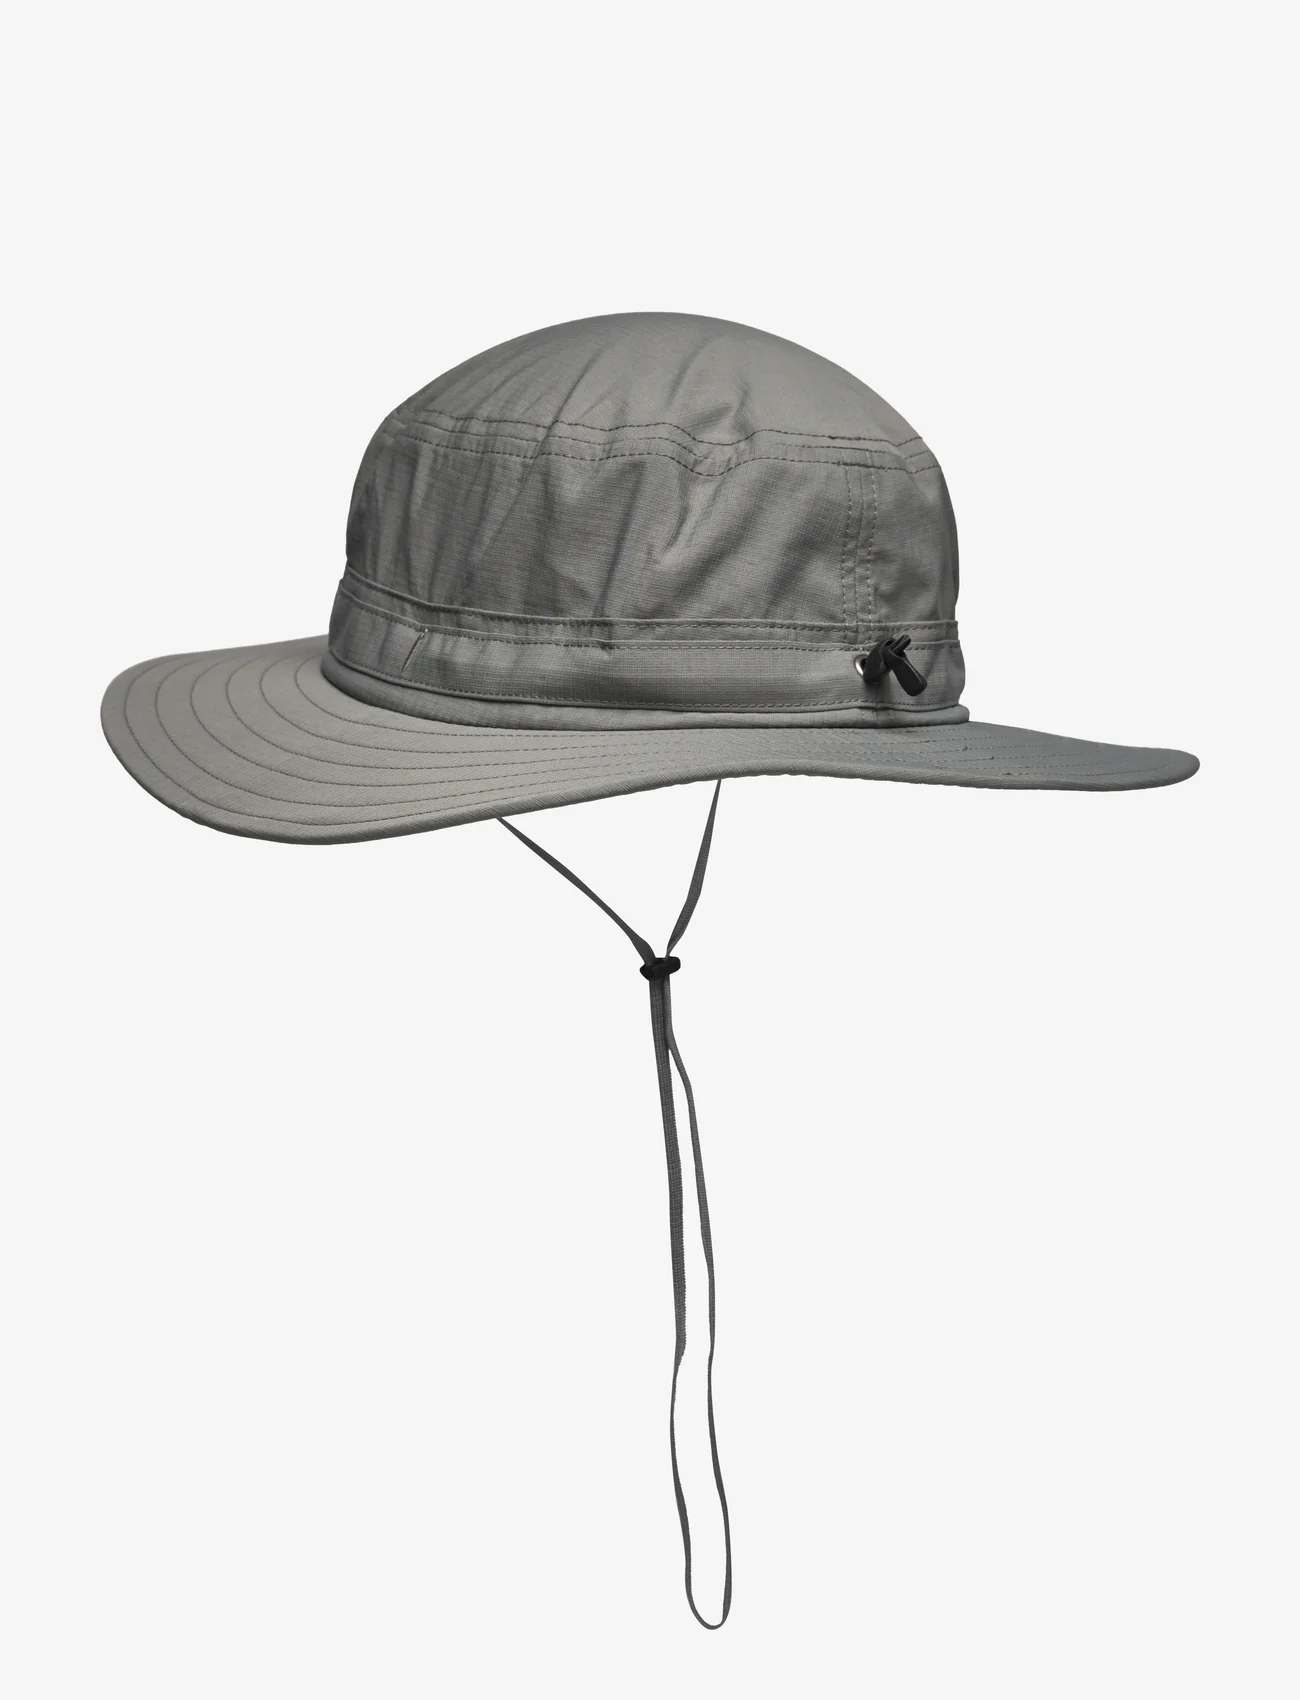 Outdoor Research - HELIOS SUN HAT - hüte - pewter - 1